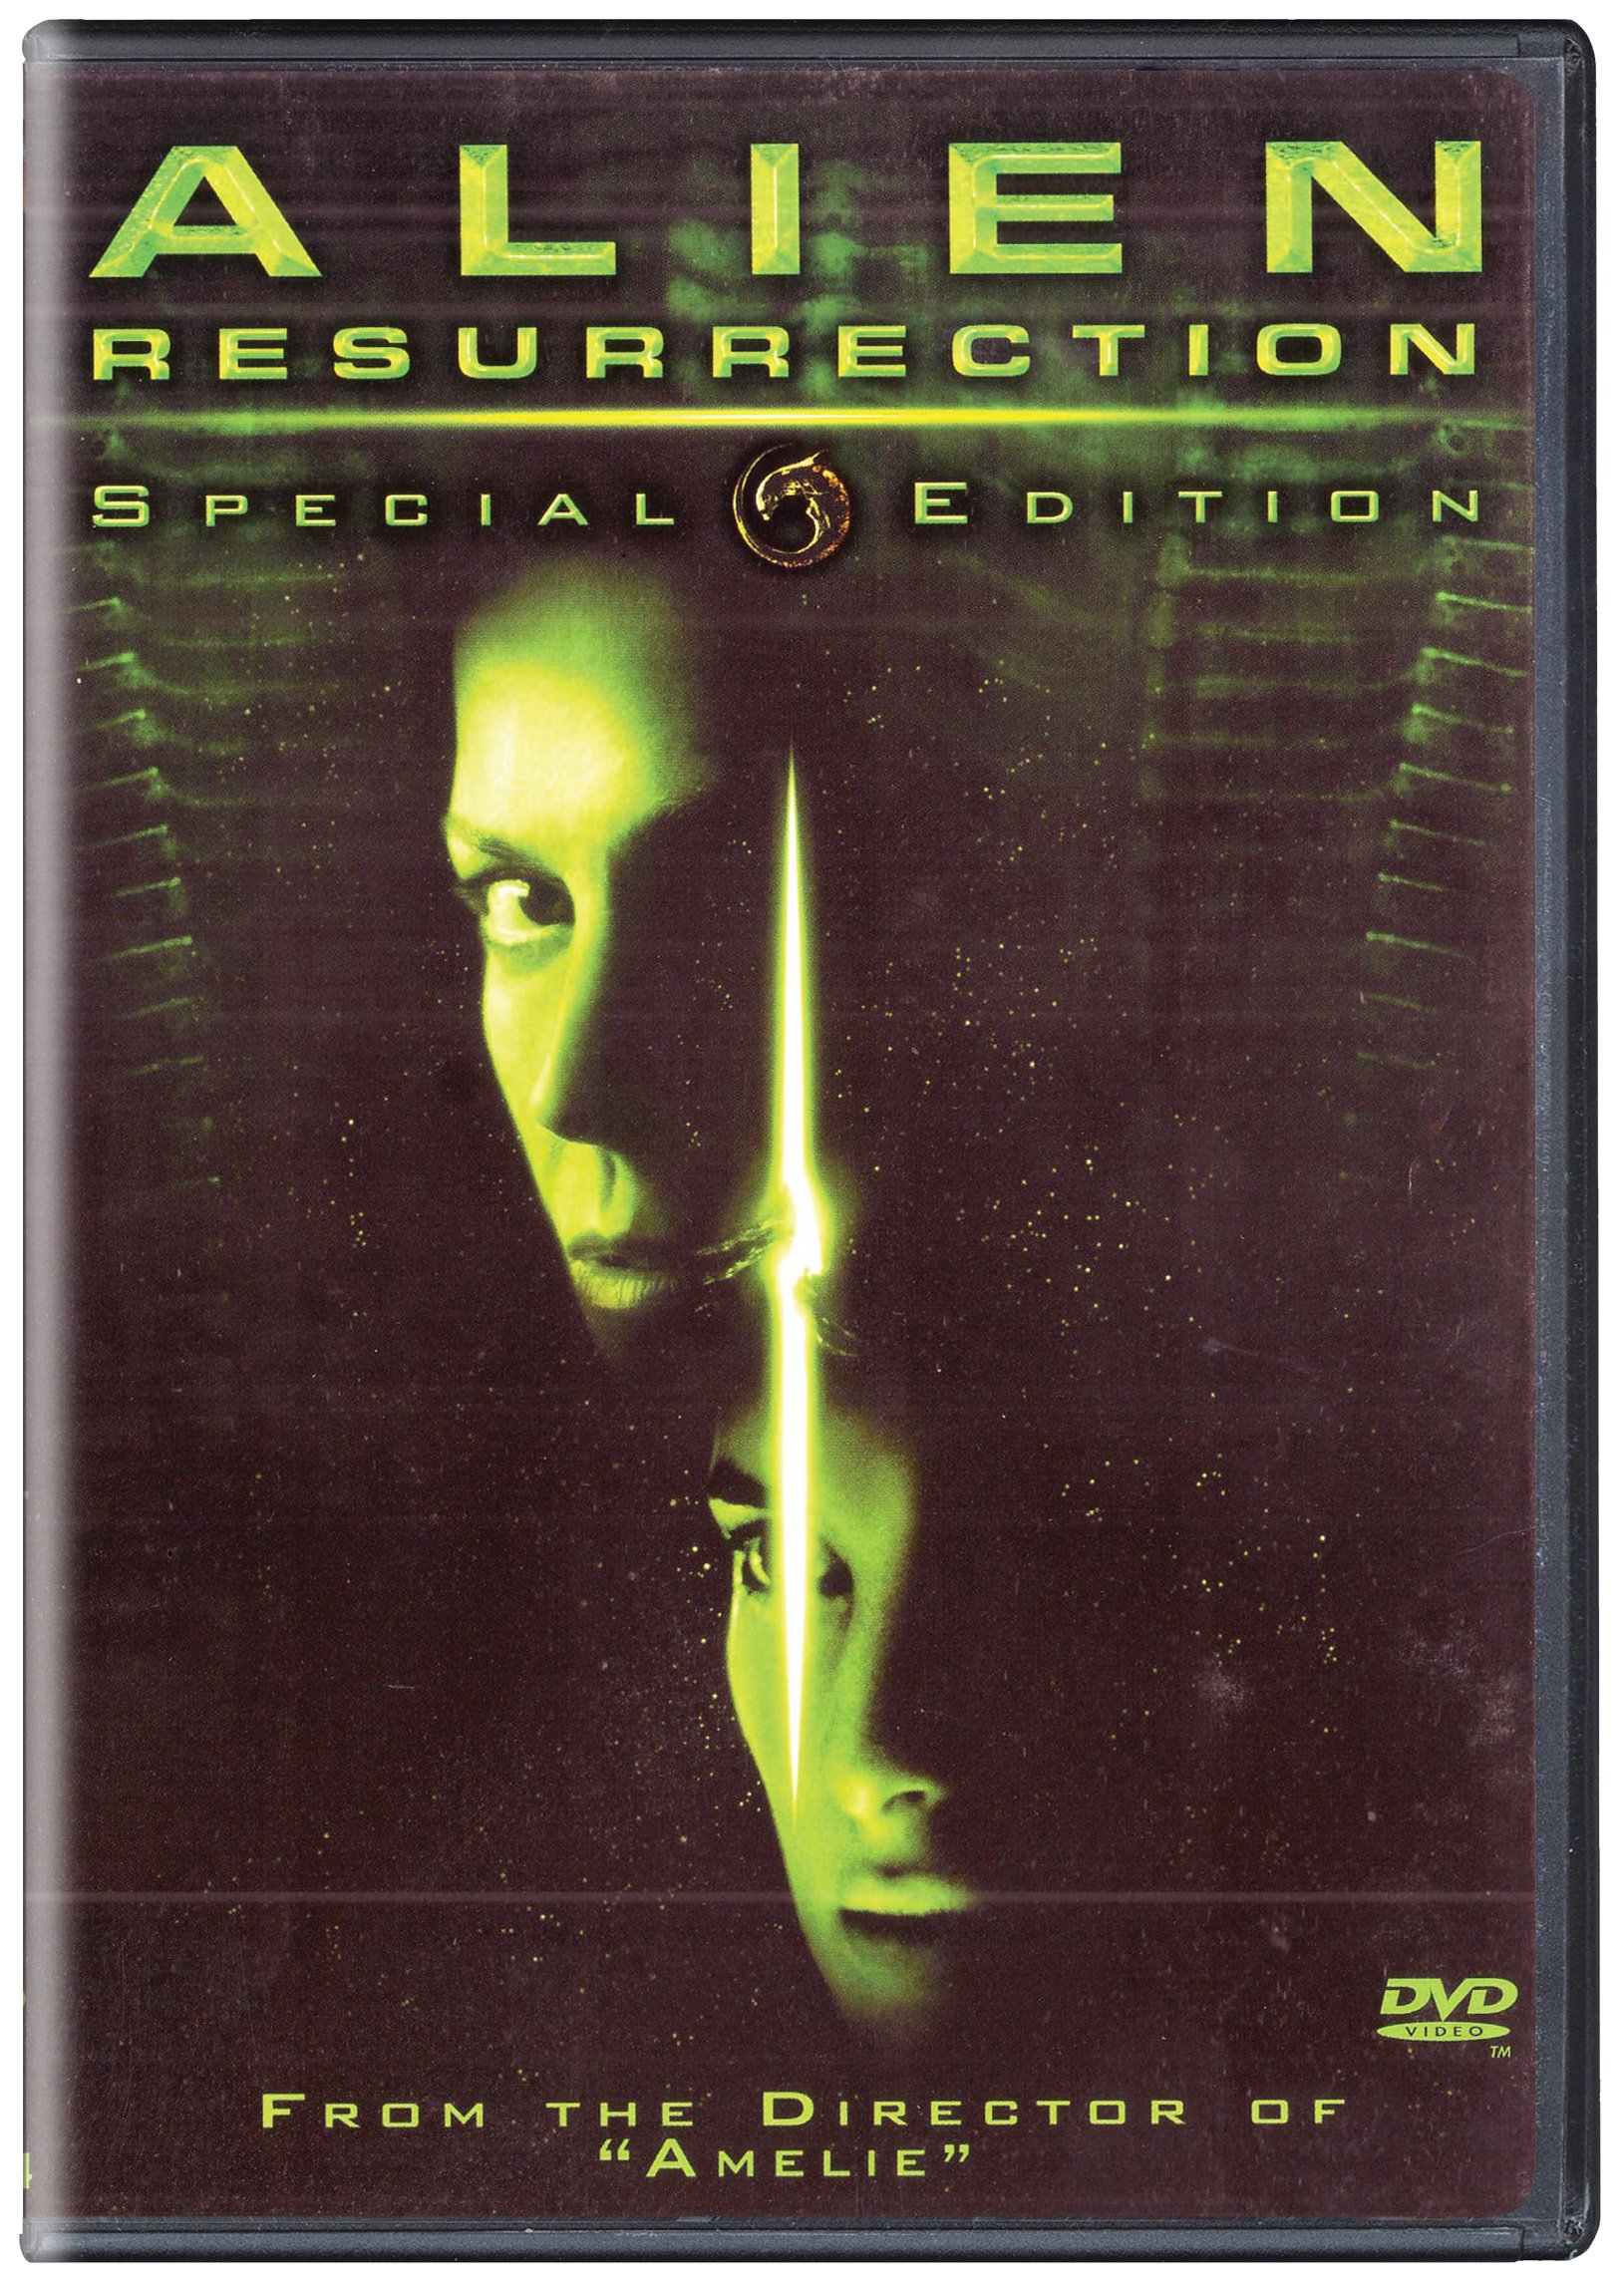 alien-resurrection-special-edition-2-disc-movie-purchase-or-watch